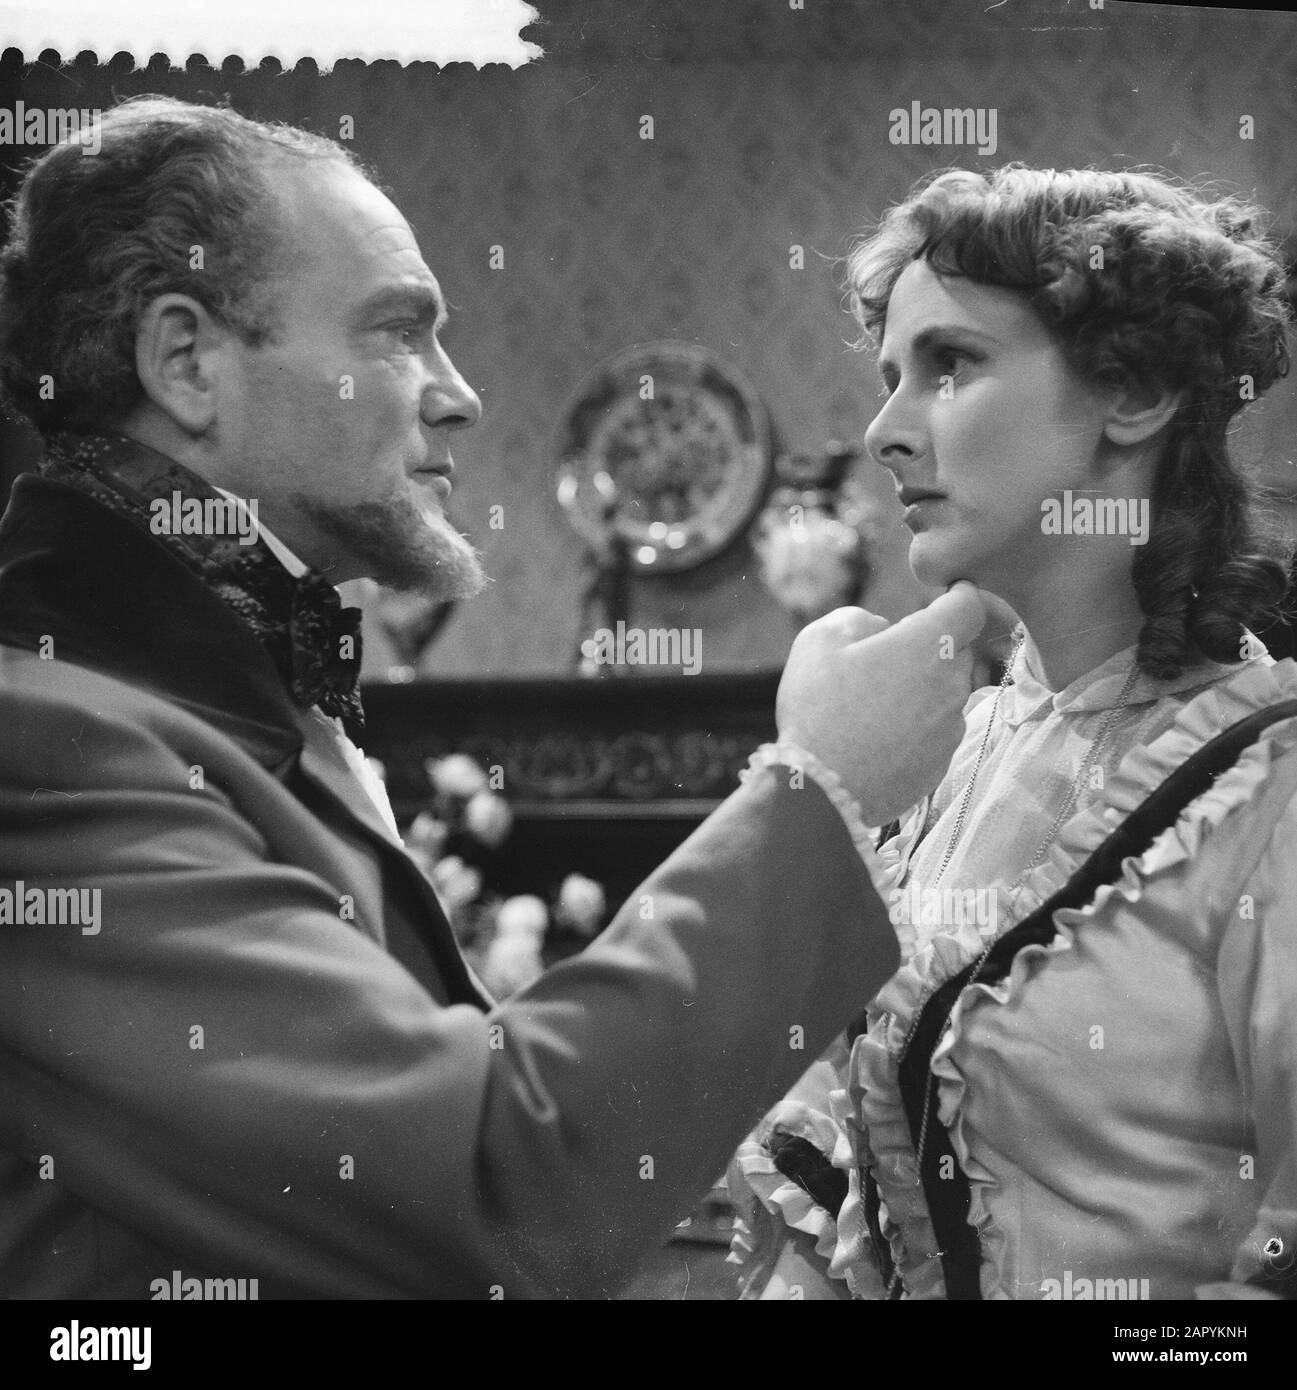 Television Game The heiress, left Max Croiset as Dr. Austin Sloper, right Manon Alving as Catherine Sloper Date: December 16, 1959 Keywords: actors, actresses, television games Personal name: Croiset, Max, Sloper, Catherine Stock Photo